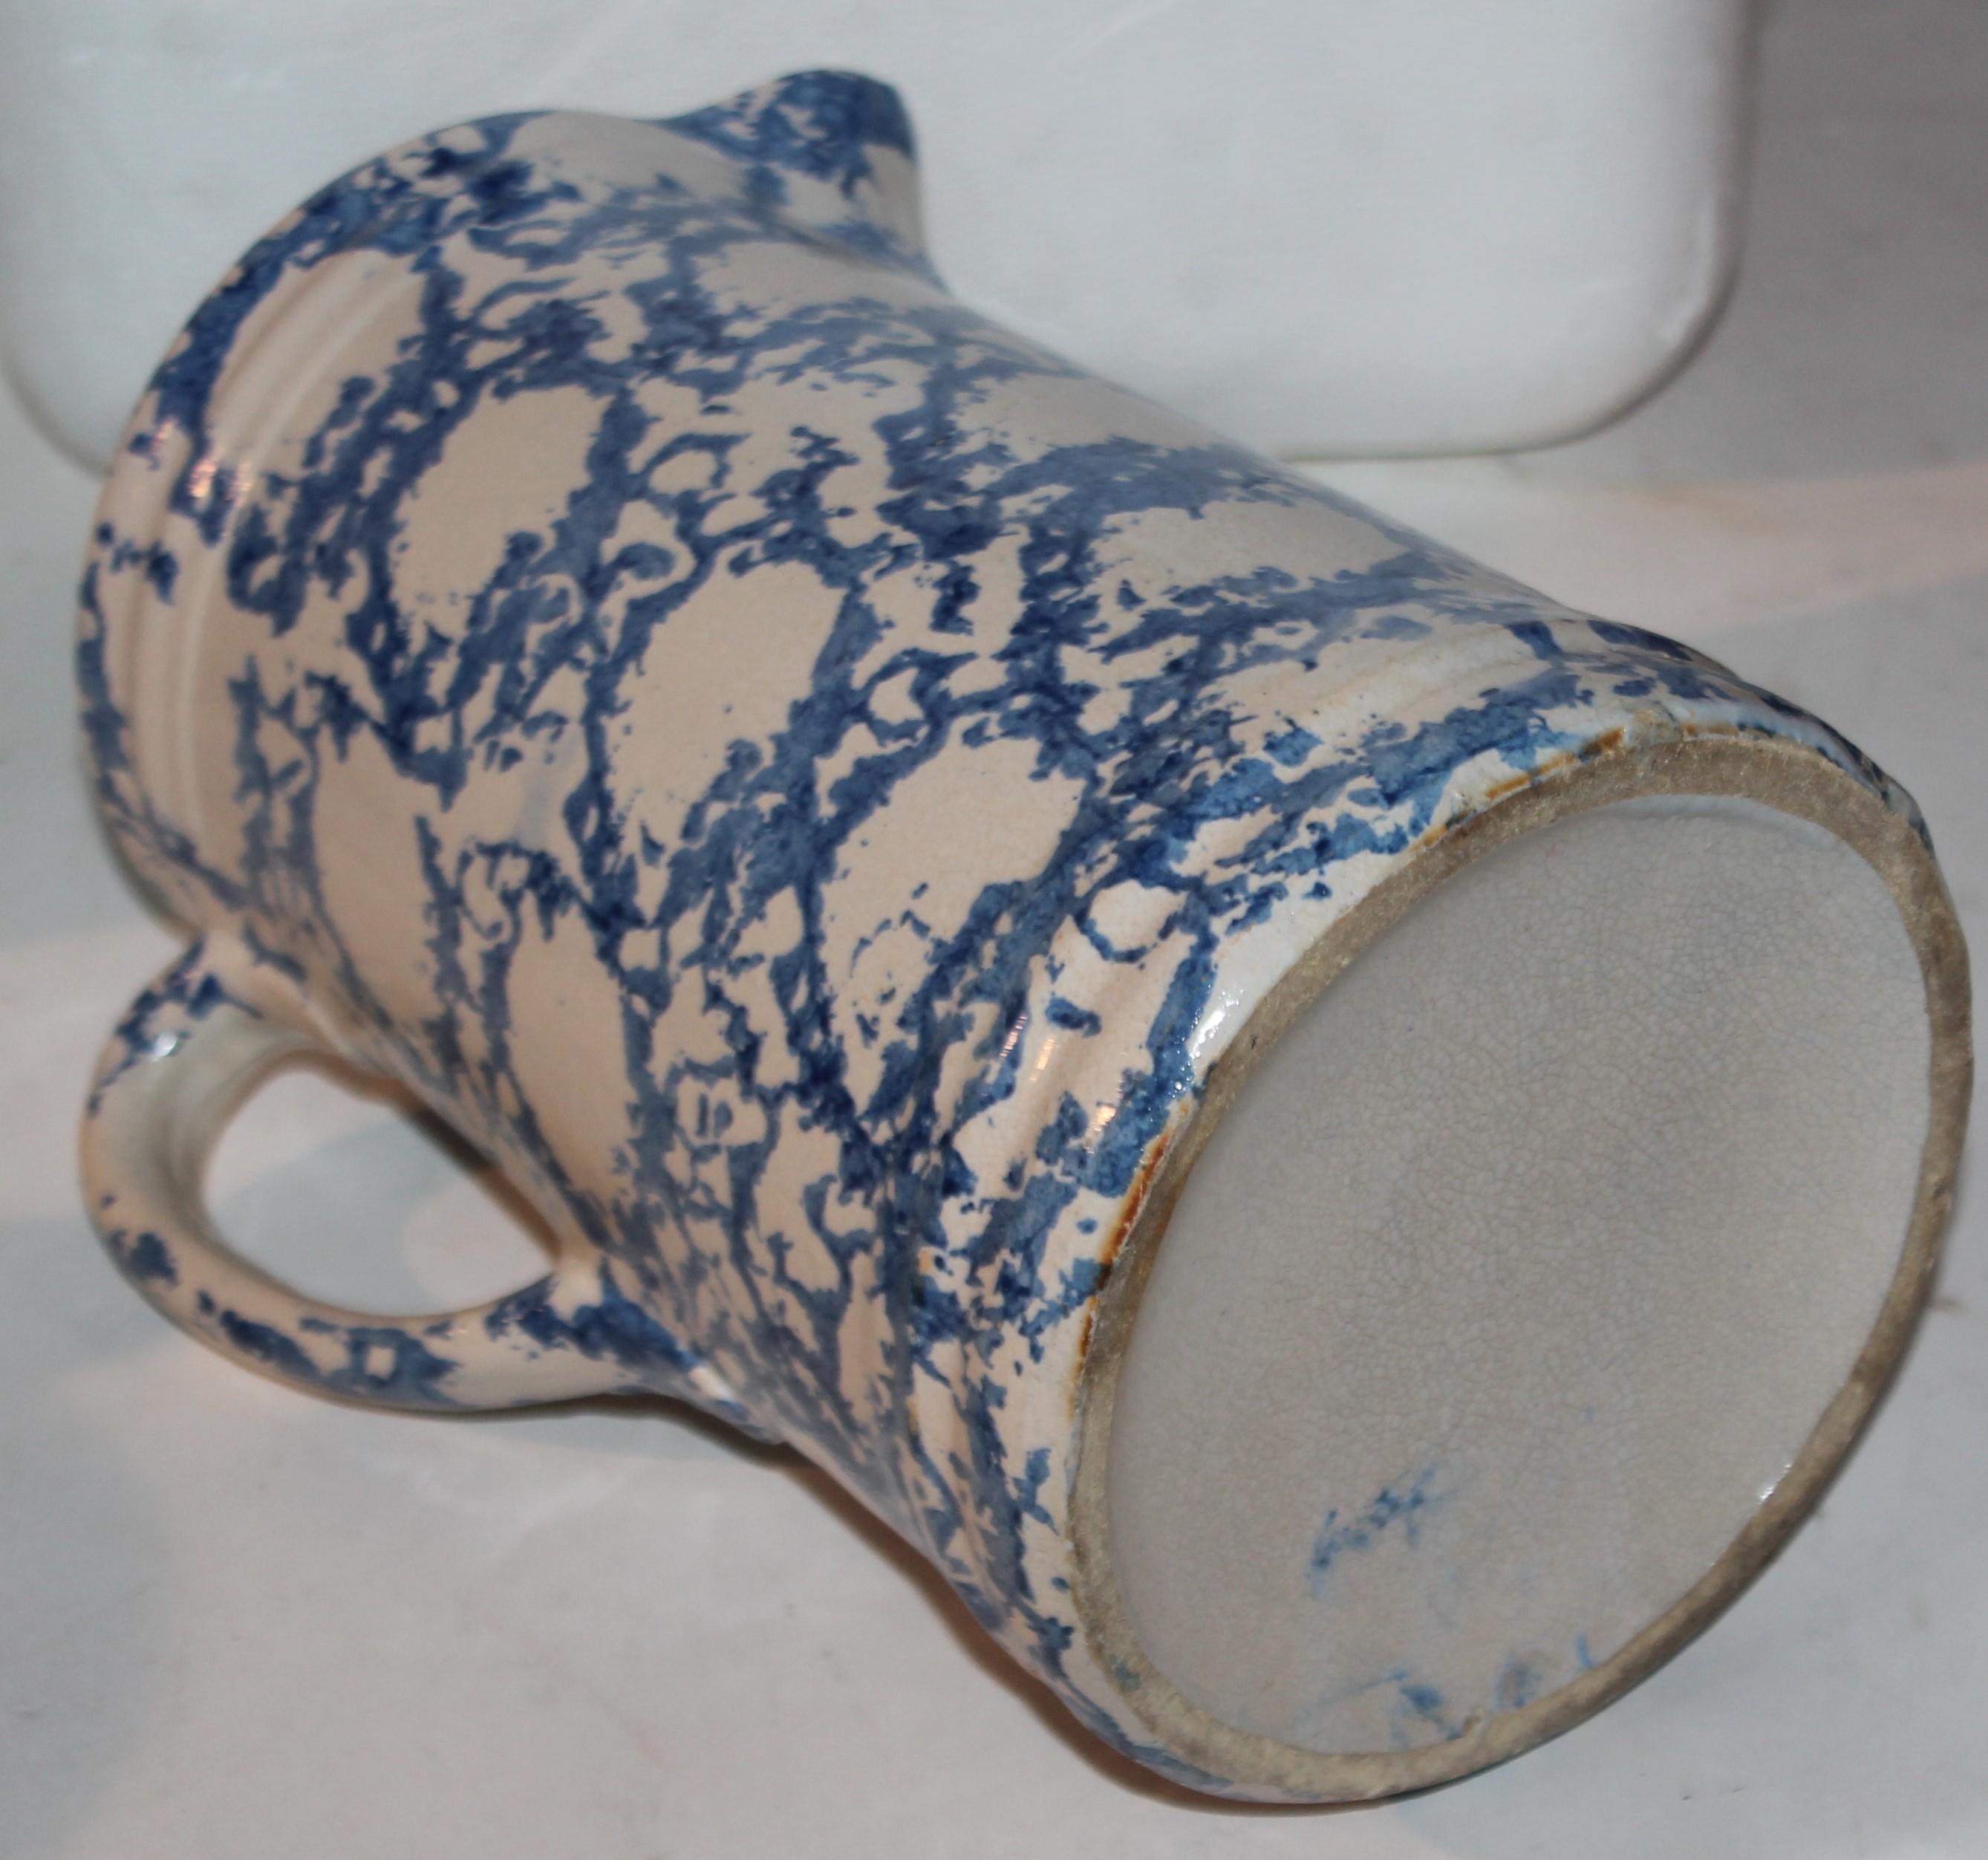 19thc Sponge ware thick smoke ring patter pitcher
The pattern is a thick blue sponge ring with a cream color background.